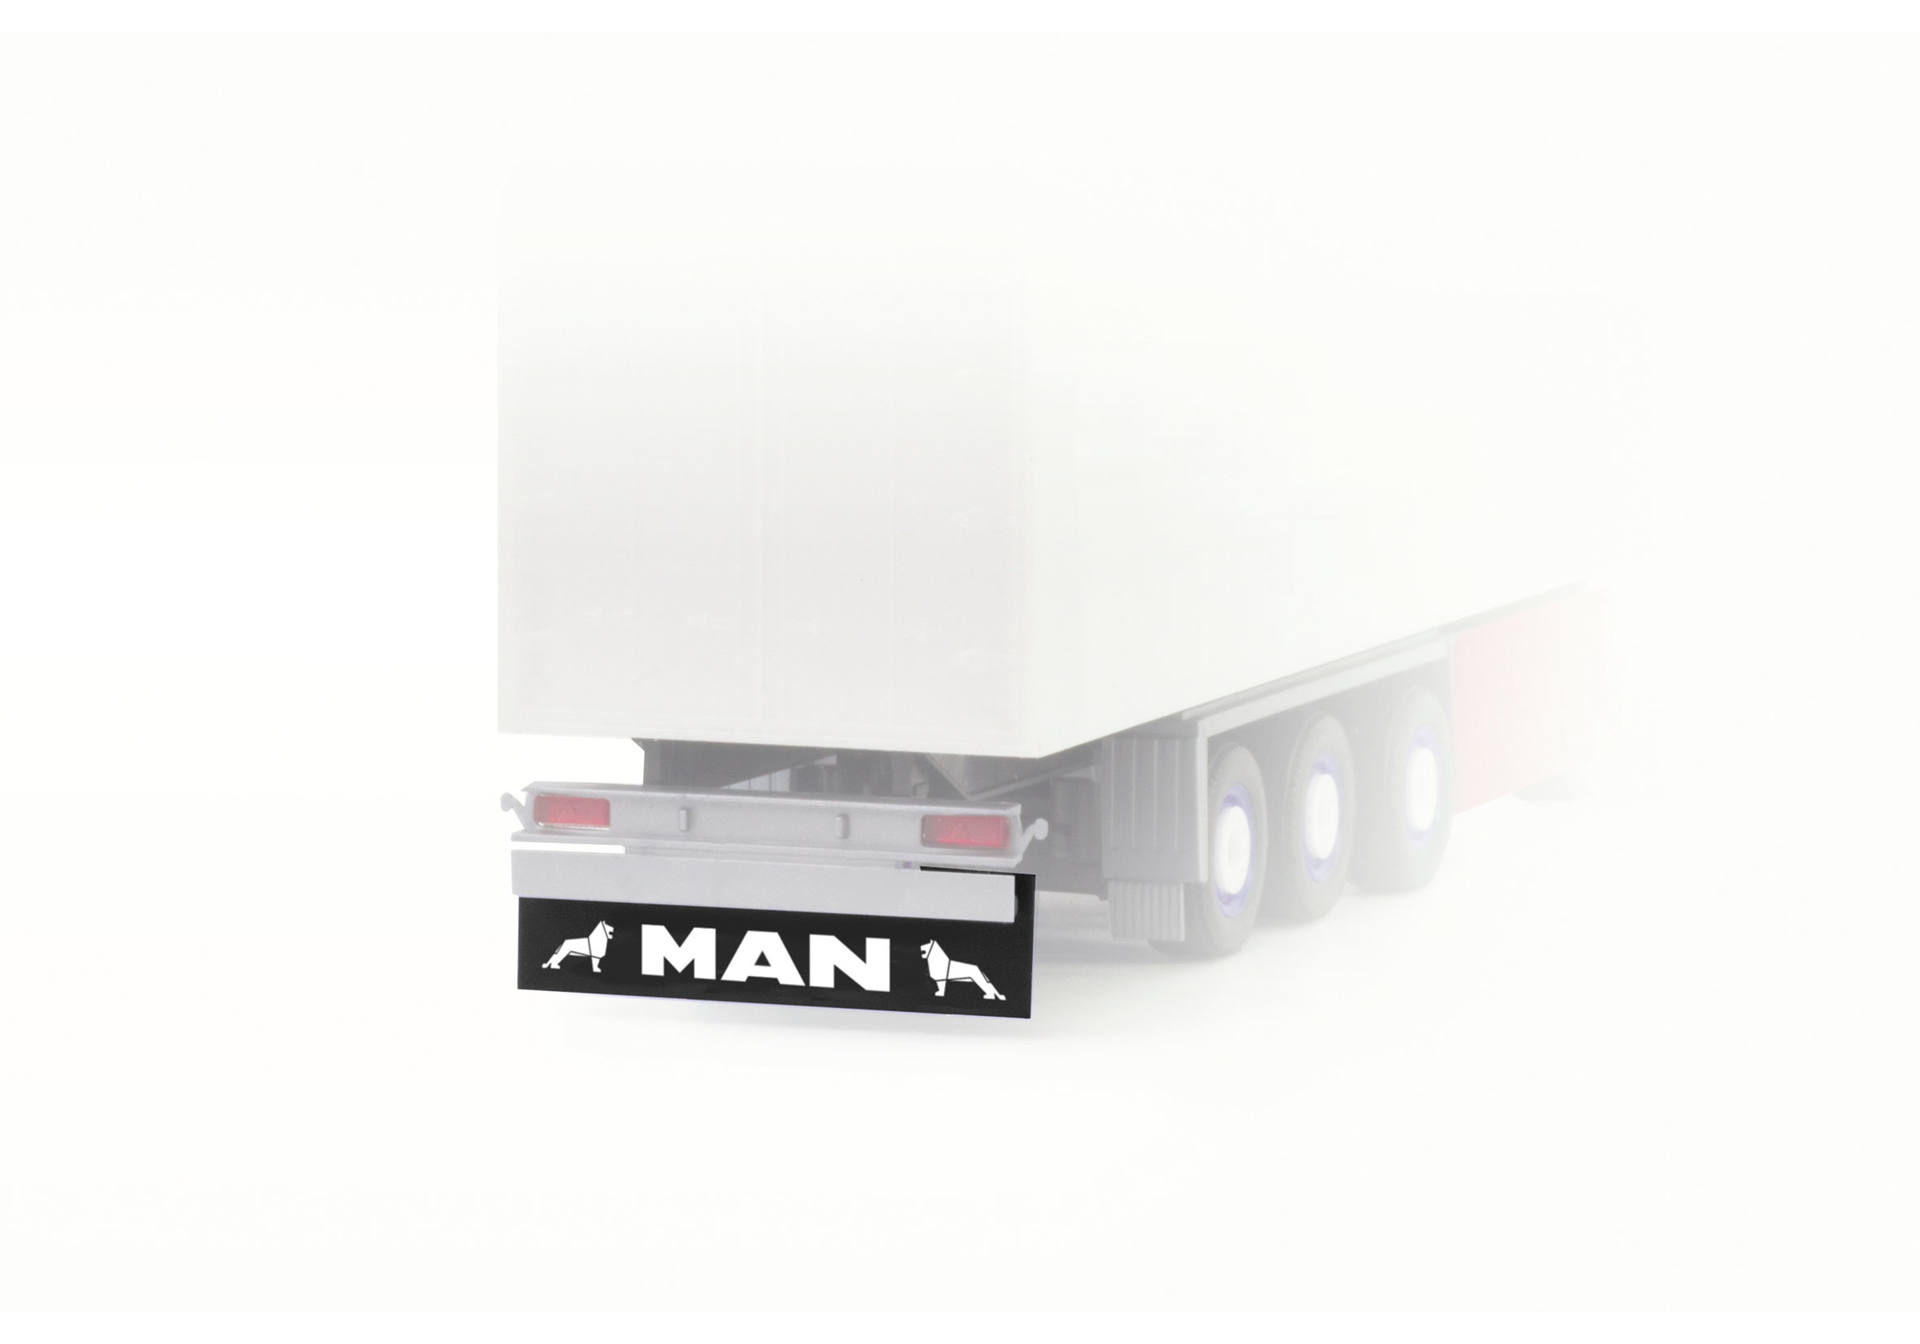 Accessory Rear splash flap for trailer and trucks "MAN" (8 pieces)